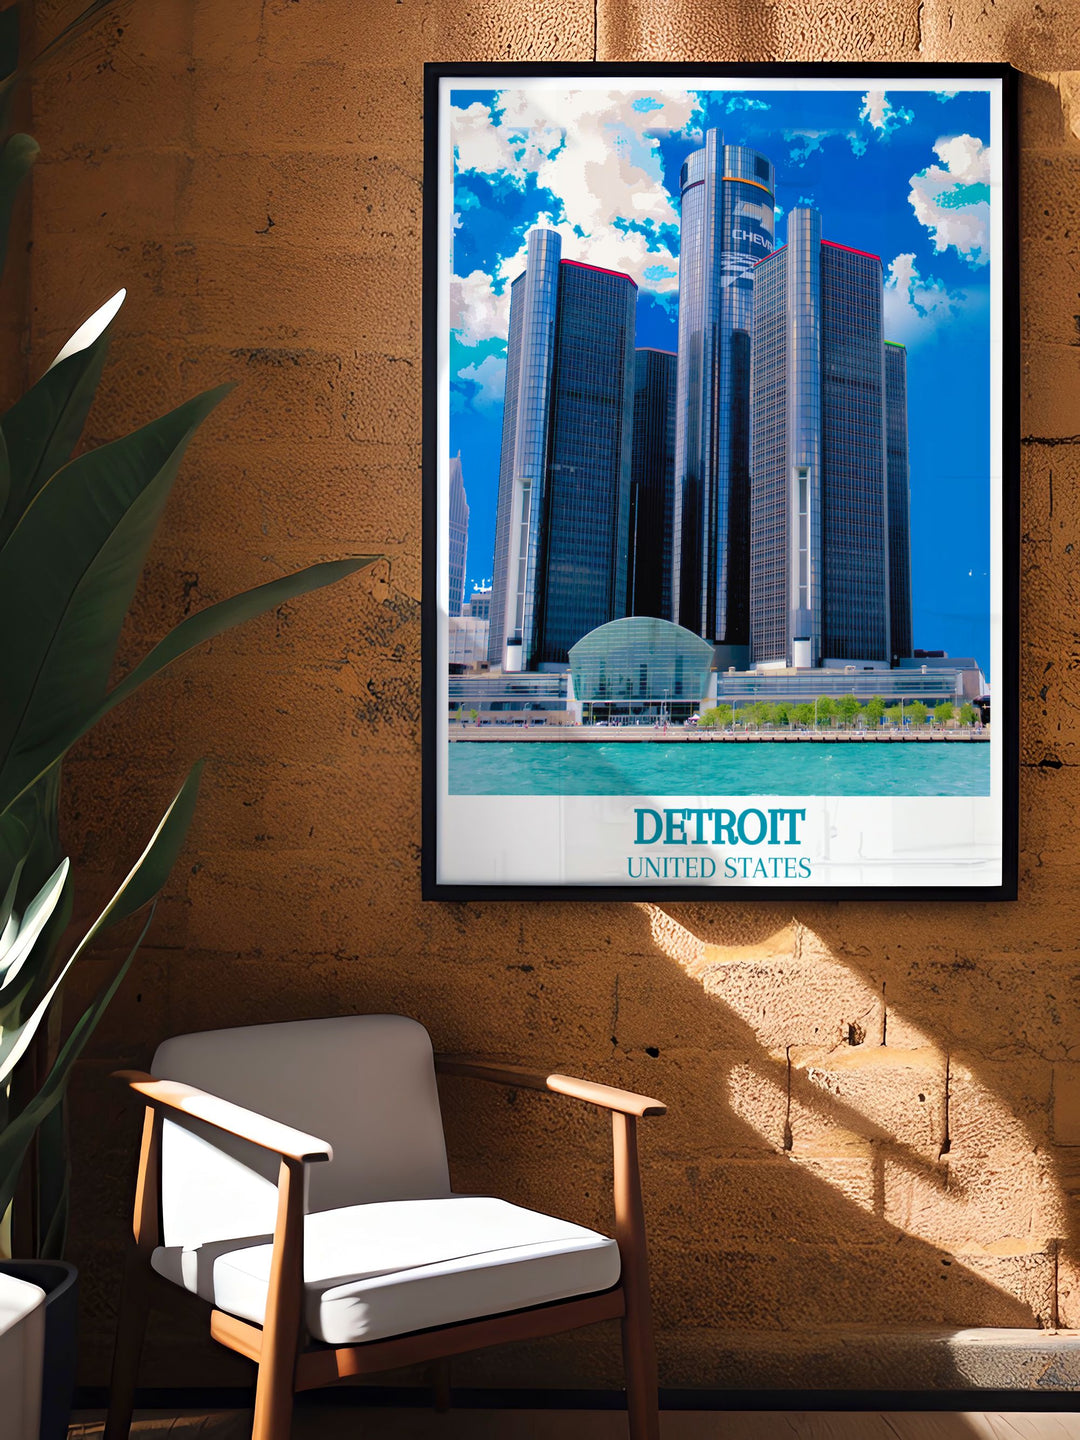 Modern wall decor showcasing the picturesque landscapes of The Renaissance Center, perfect for bringing a sense of urban charm and history into your home.